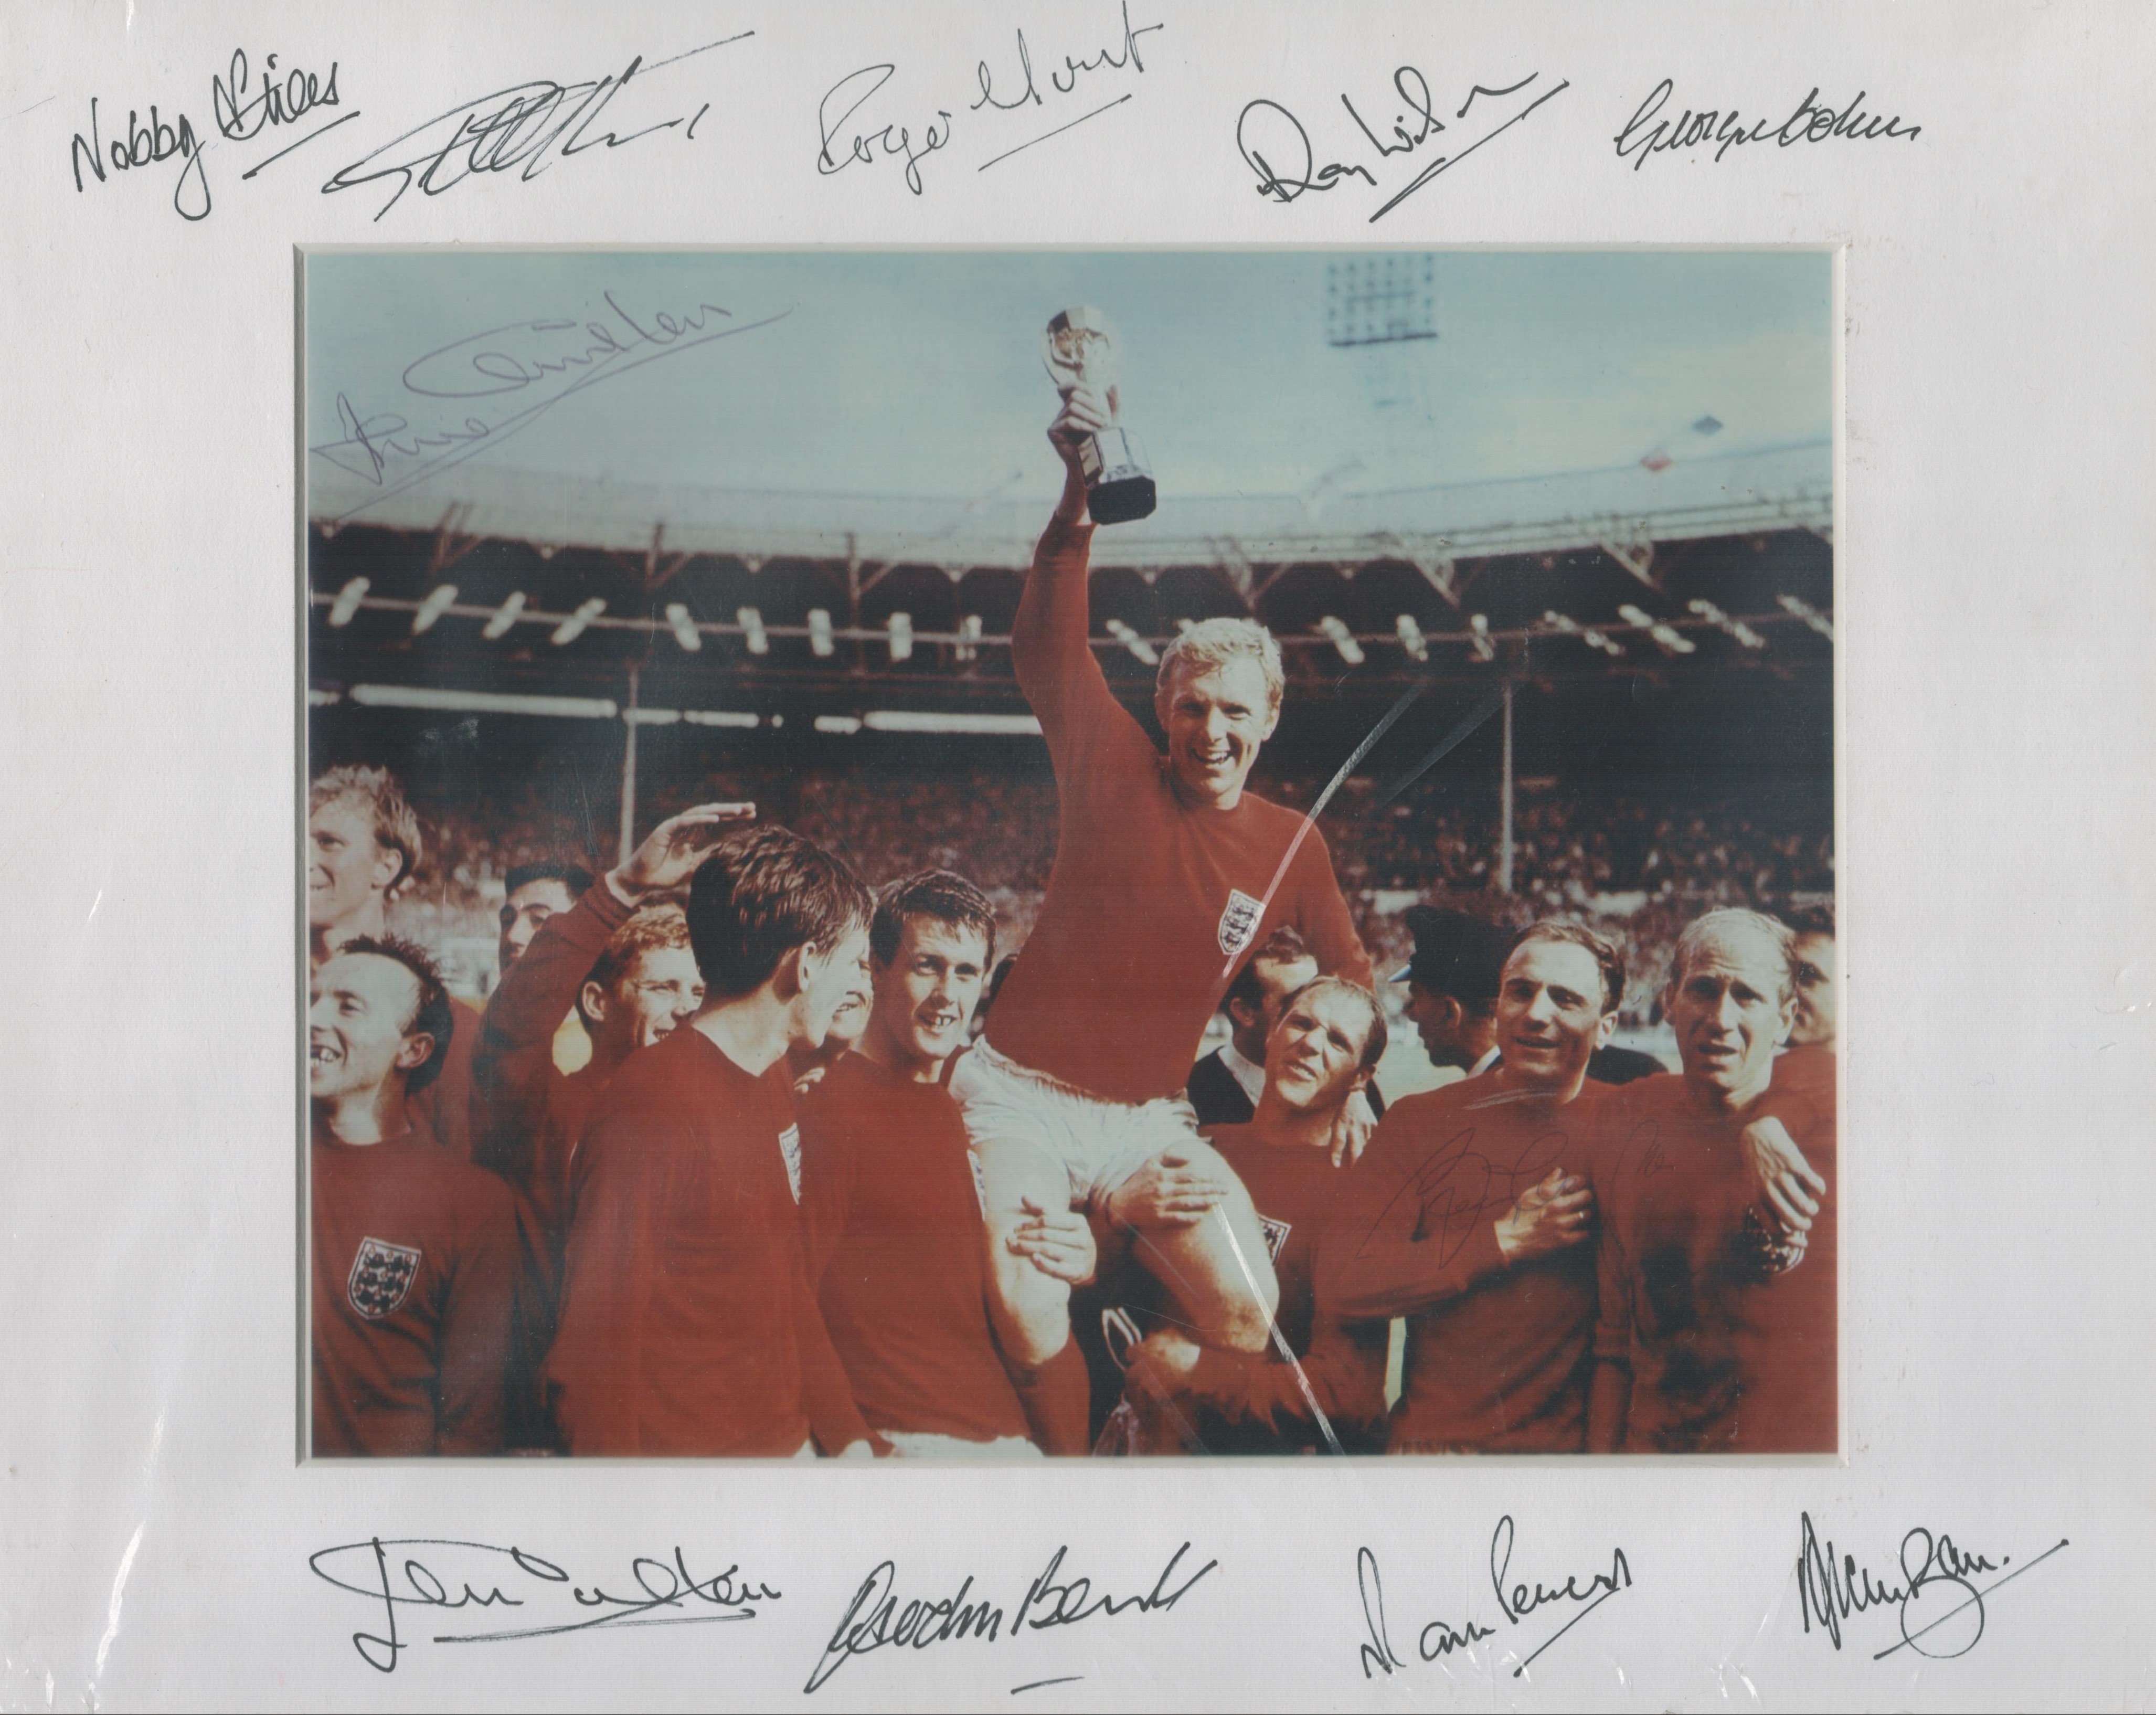 England 1966 World Cup Winners 14x11 inch overall mounted signature piece includes 9 signatures